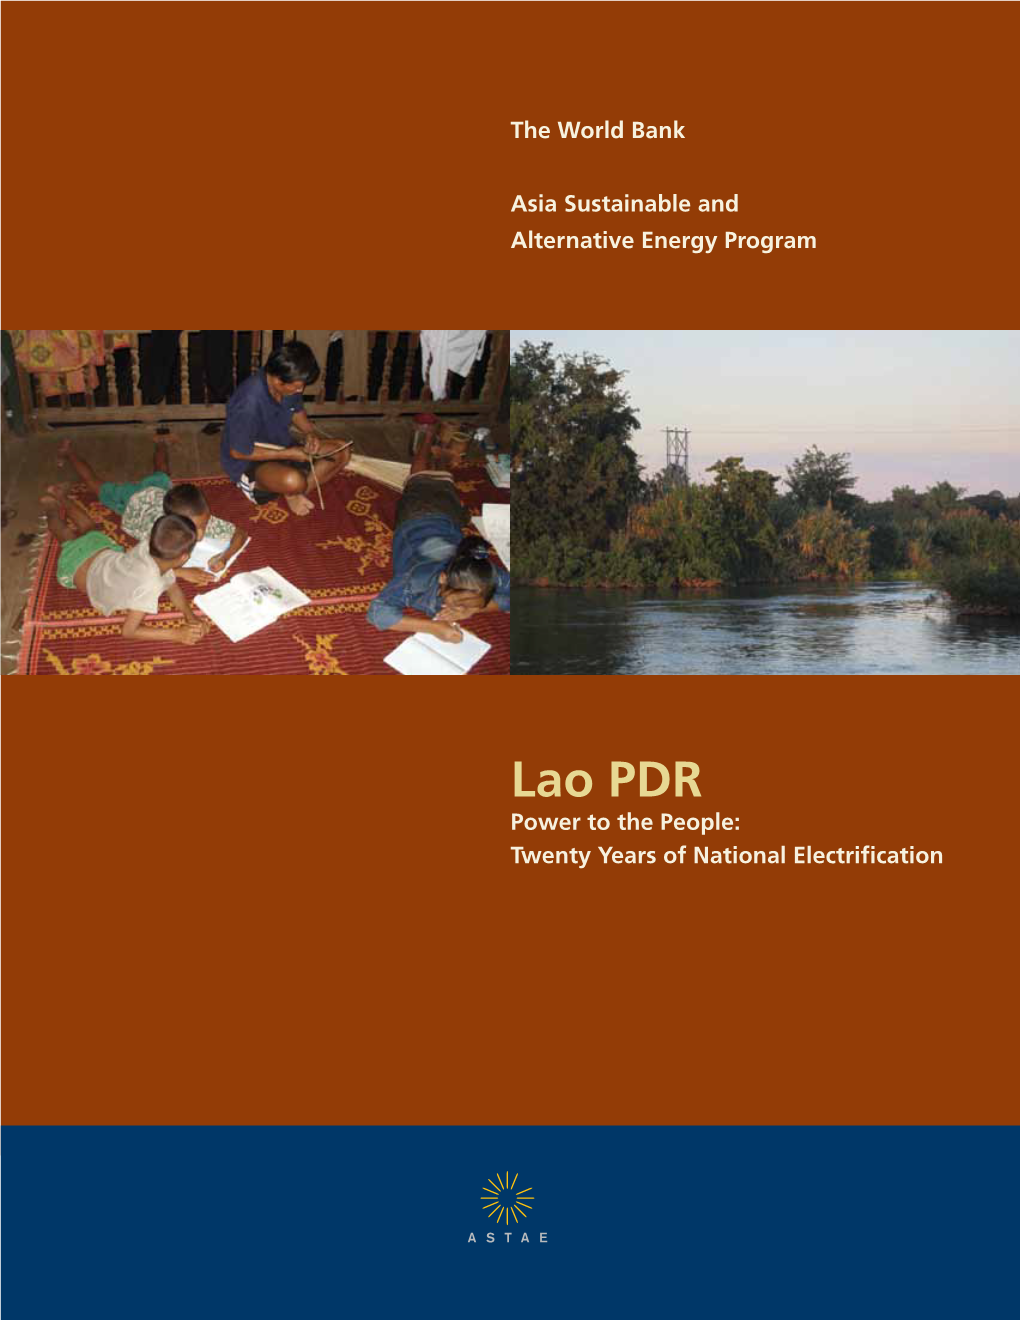 Lao PDR Power to the People: Twenty Years of National Electrification Copyright © 2012